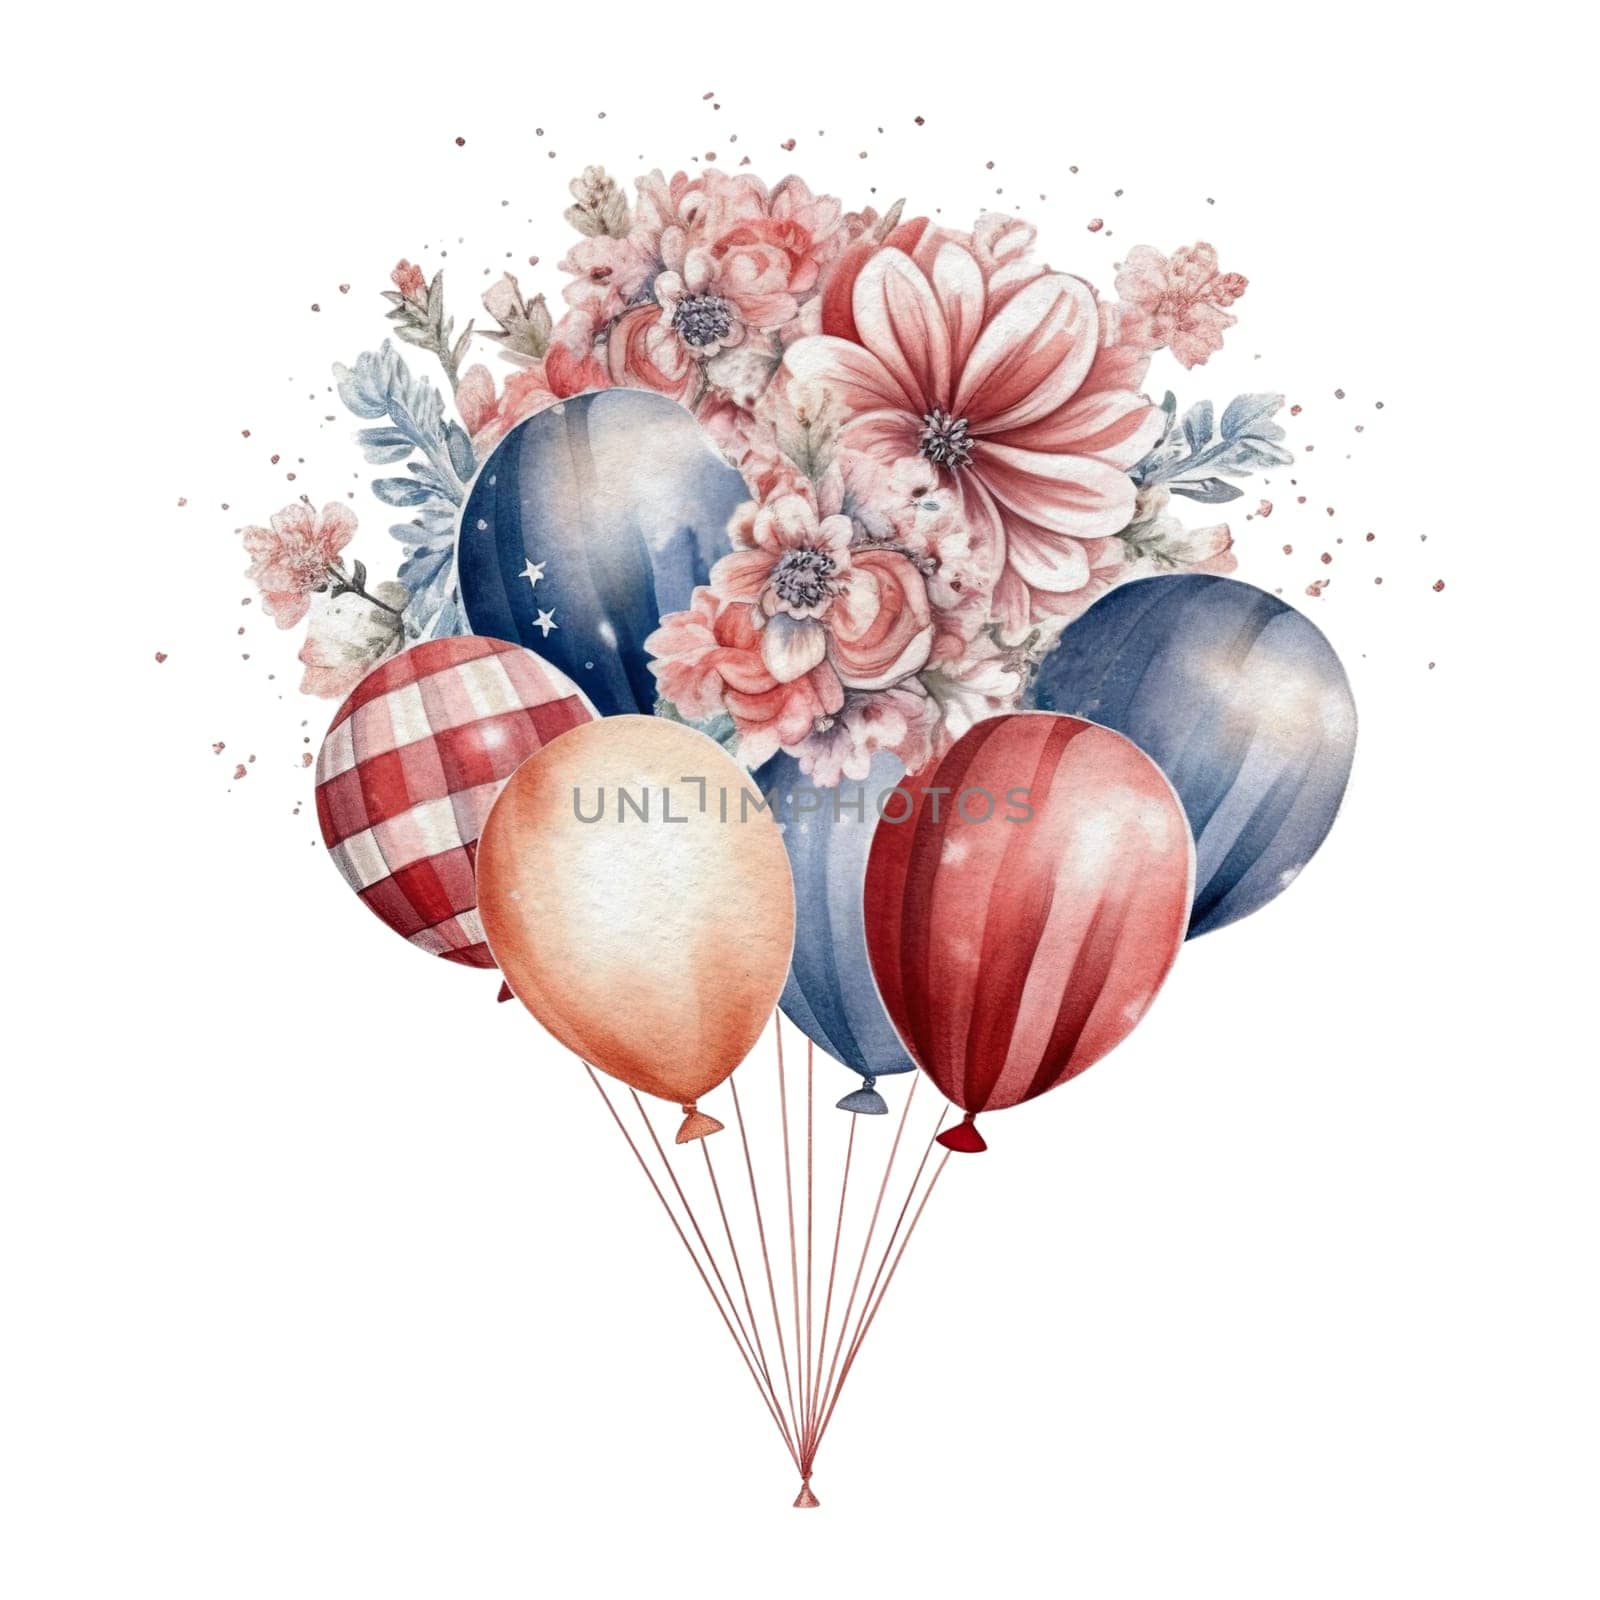 Watercolor 4th of July Independence Day Party Balloons Cosy Decoration Illustration Clipart by Skyecreativestudio